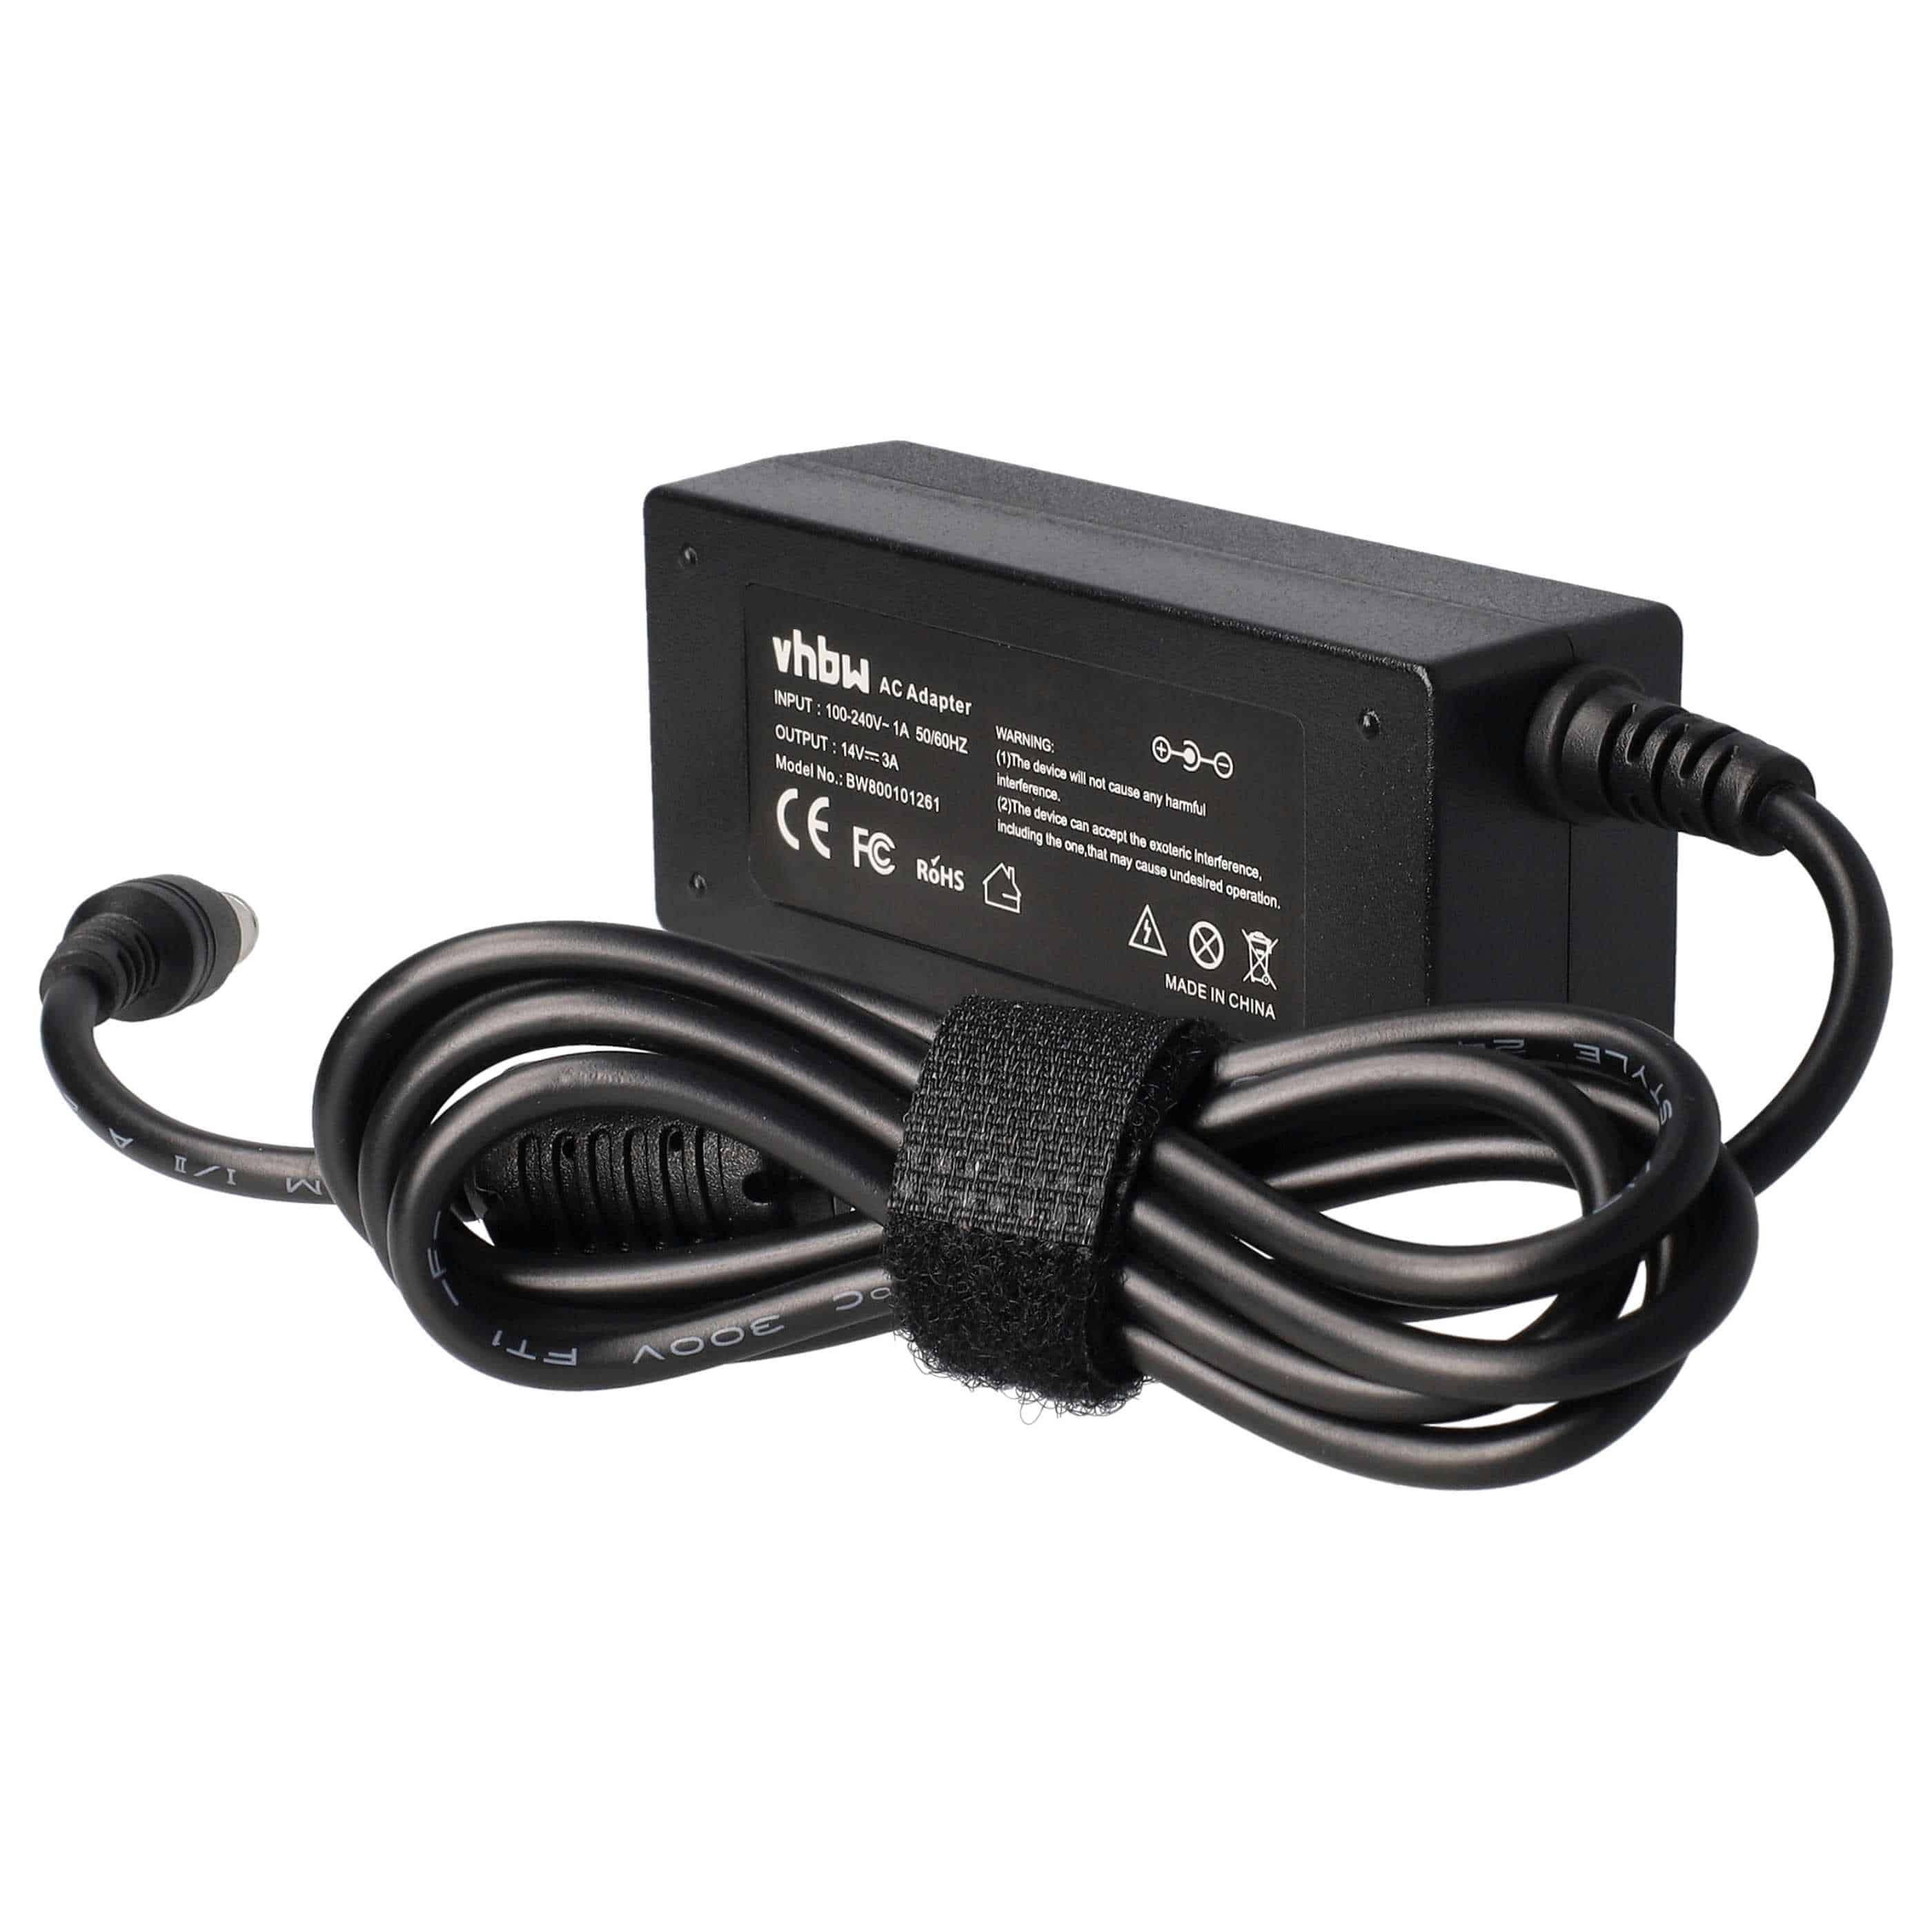 Mains Power Adapter replaces Samsung AD-3014, 14030GPCN, A3014VE for DellNotebook etc. - 200 cm, 42 W